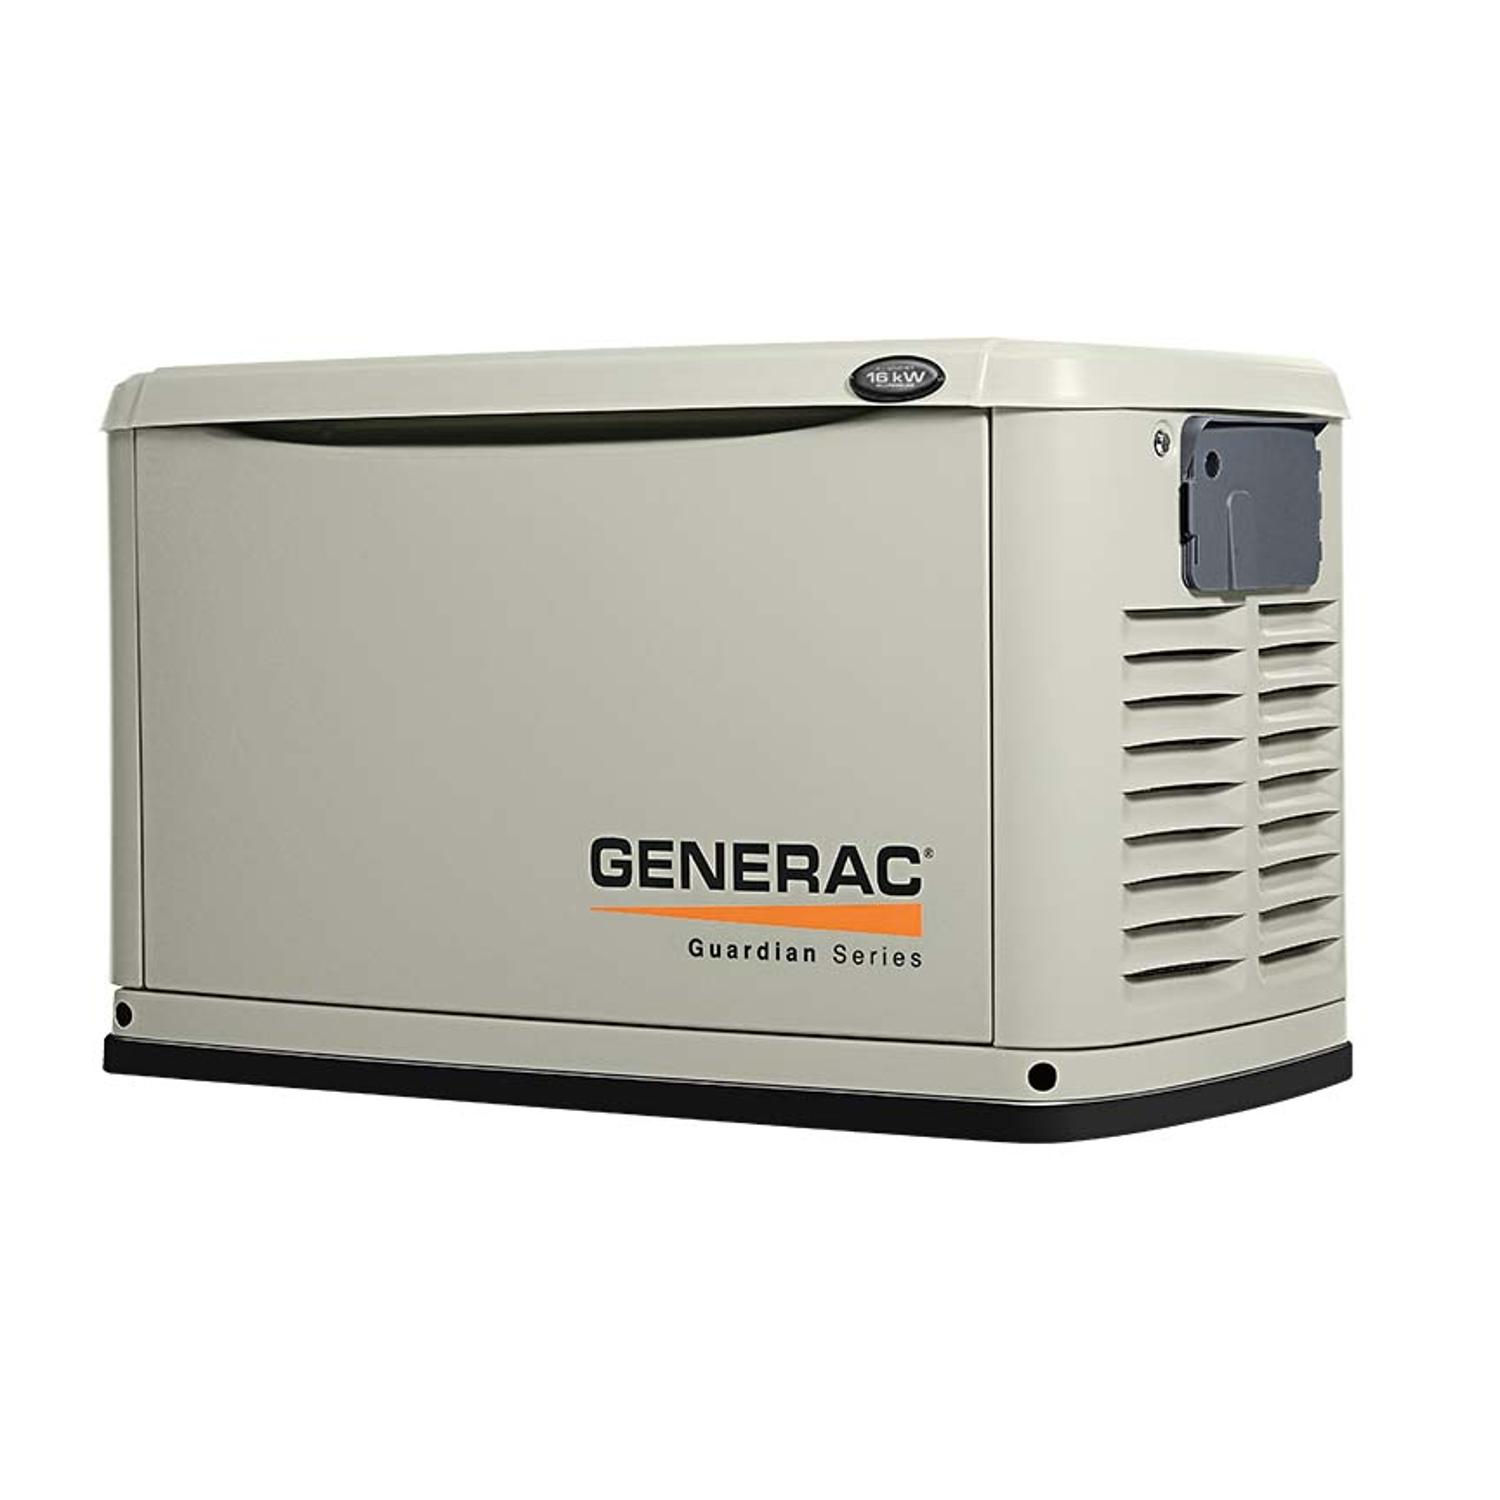 Automatic Standby Generators from Generac